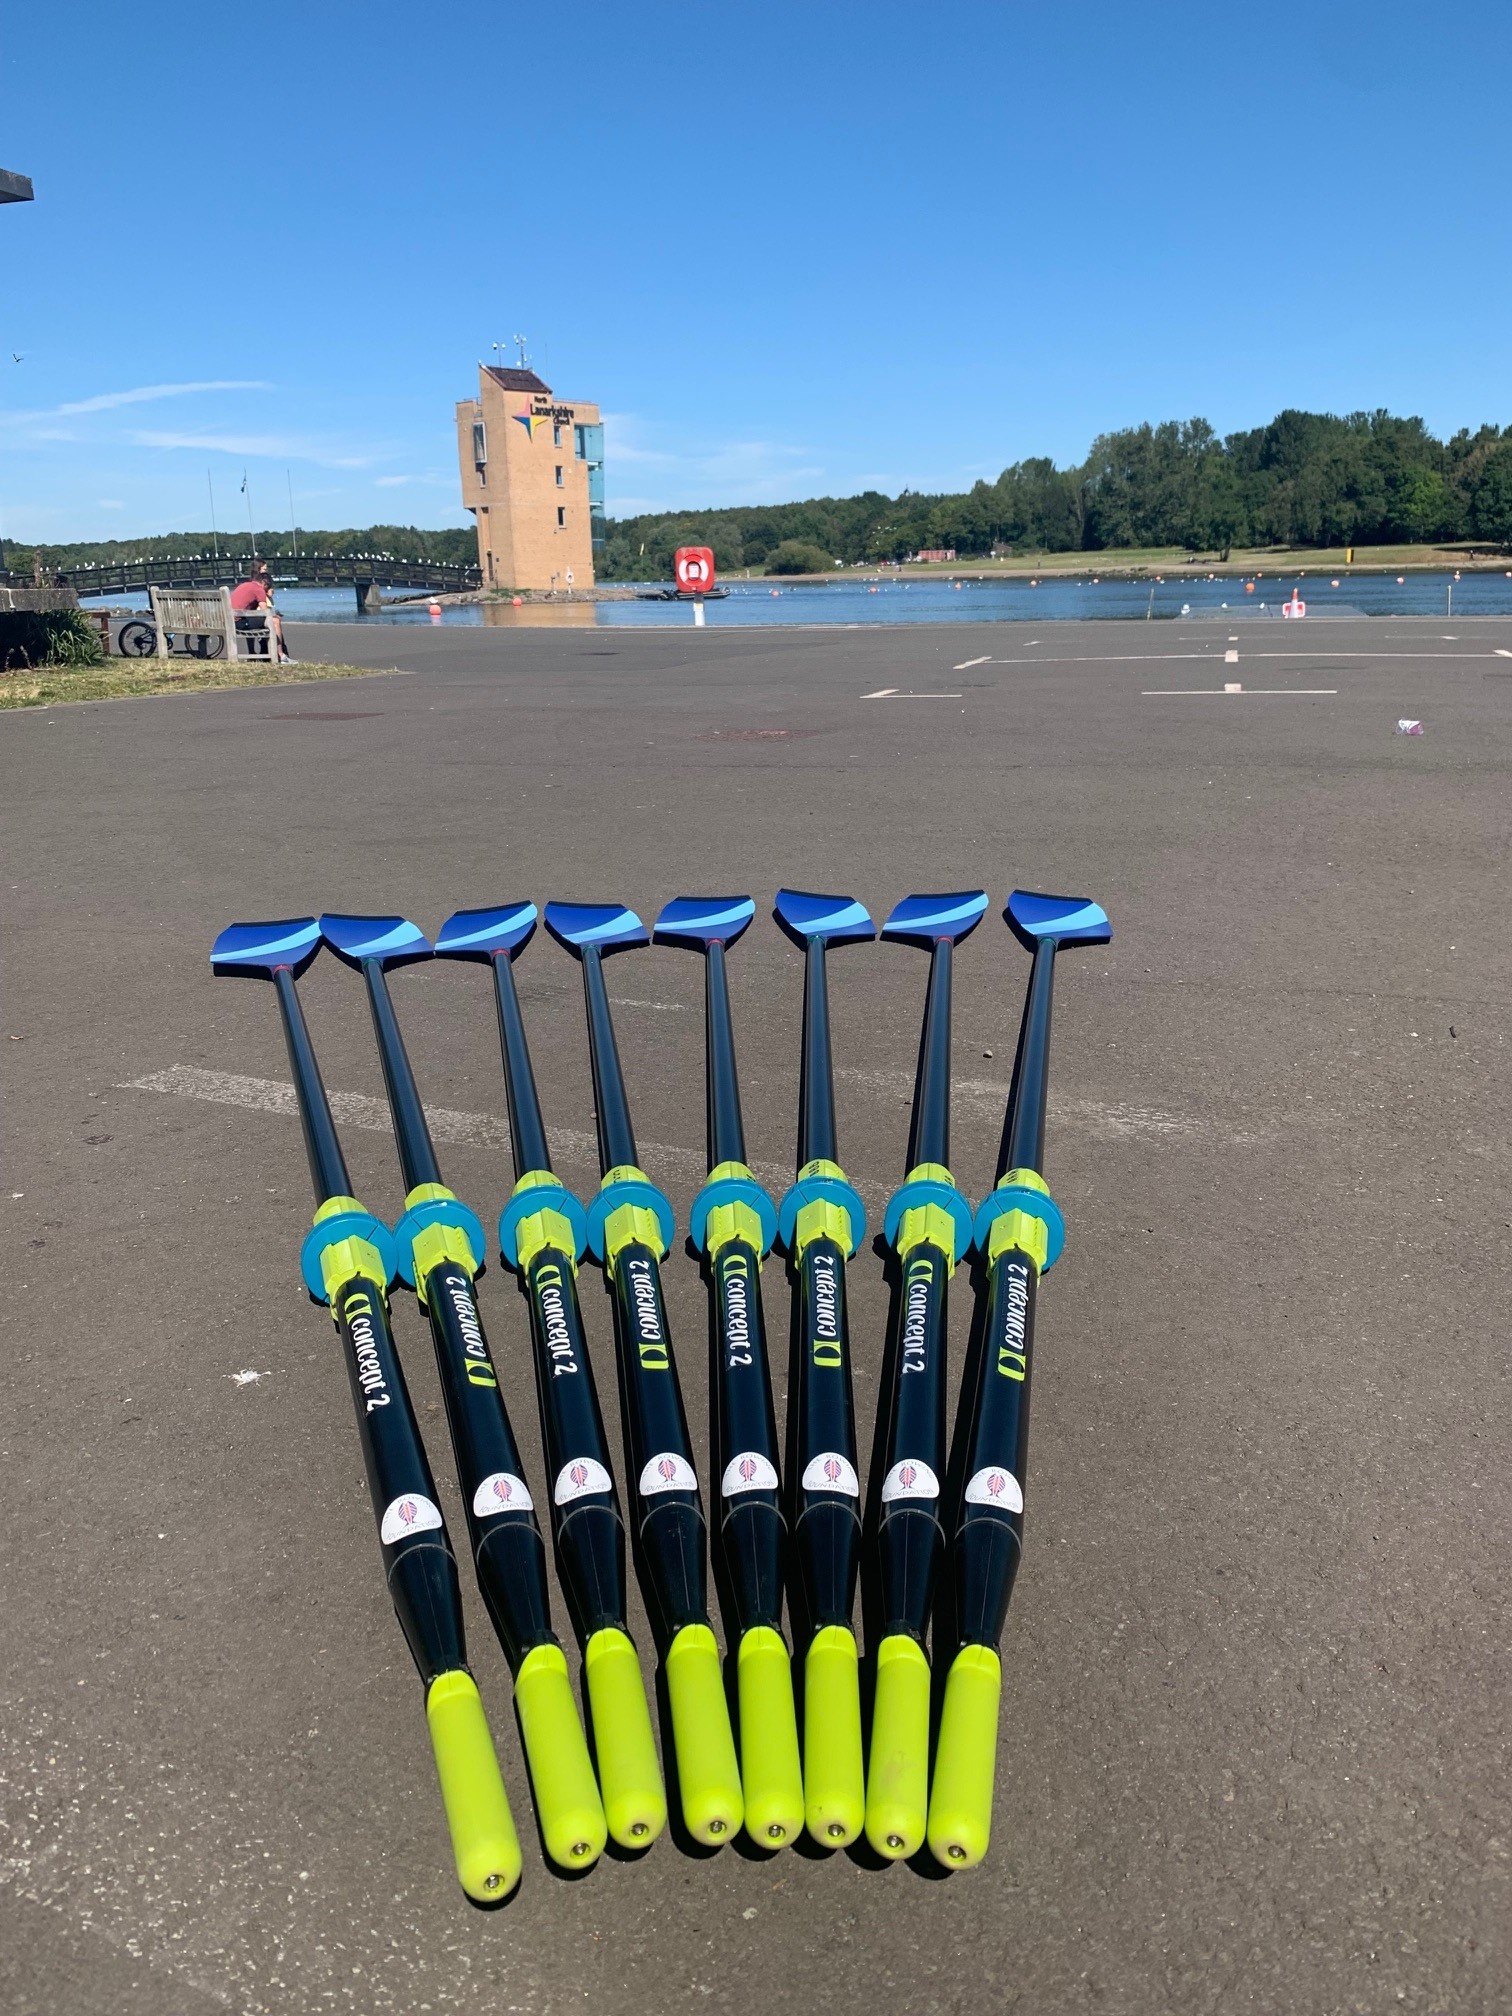 New Blades from The Rowing Foundation